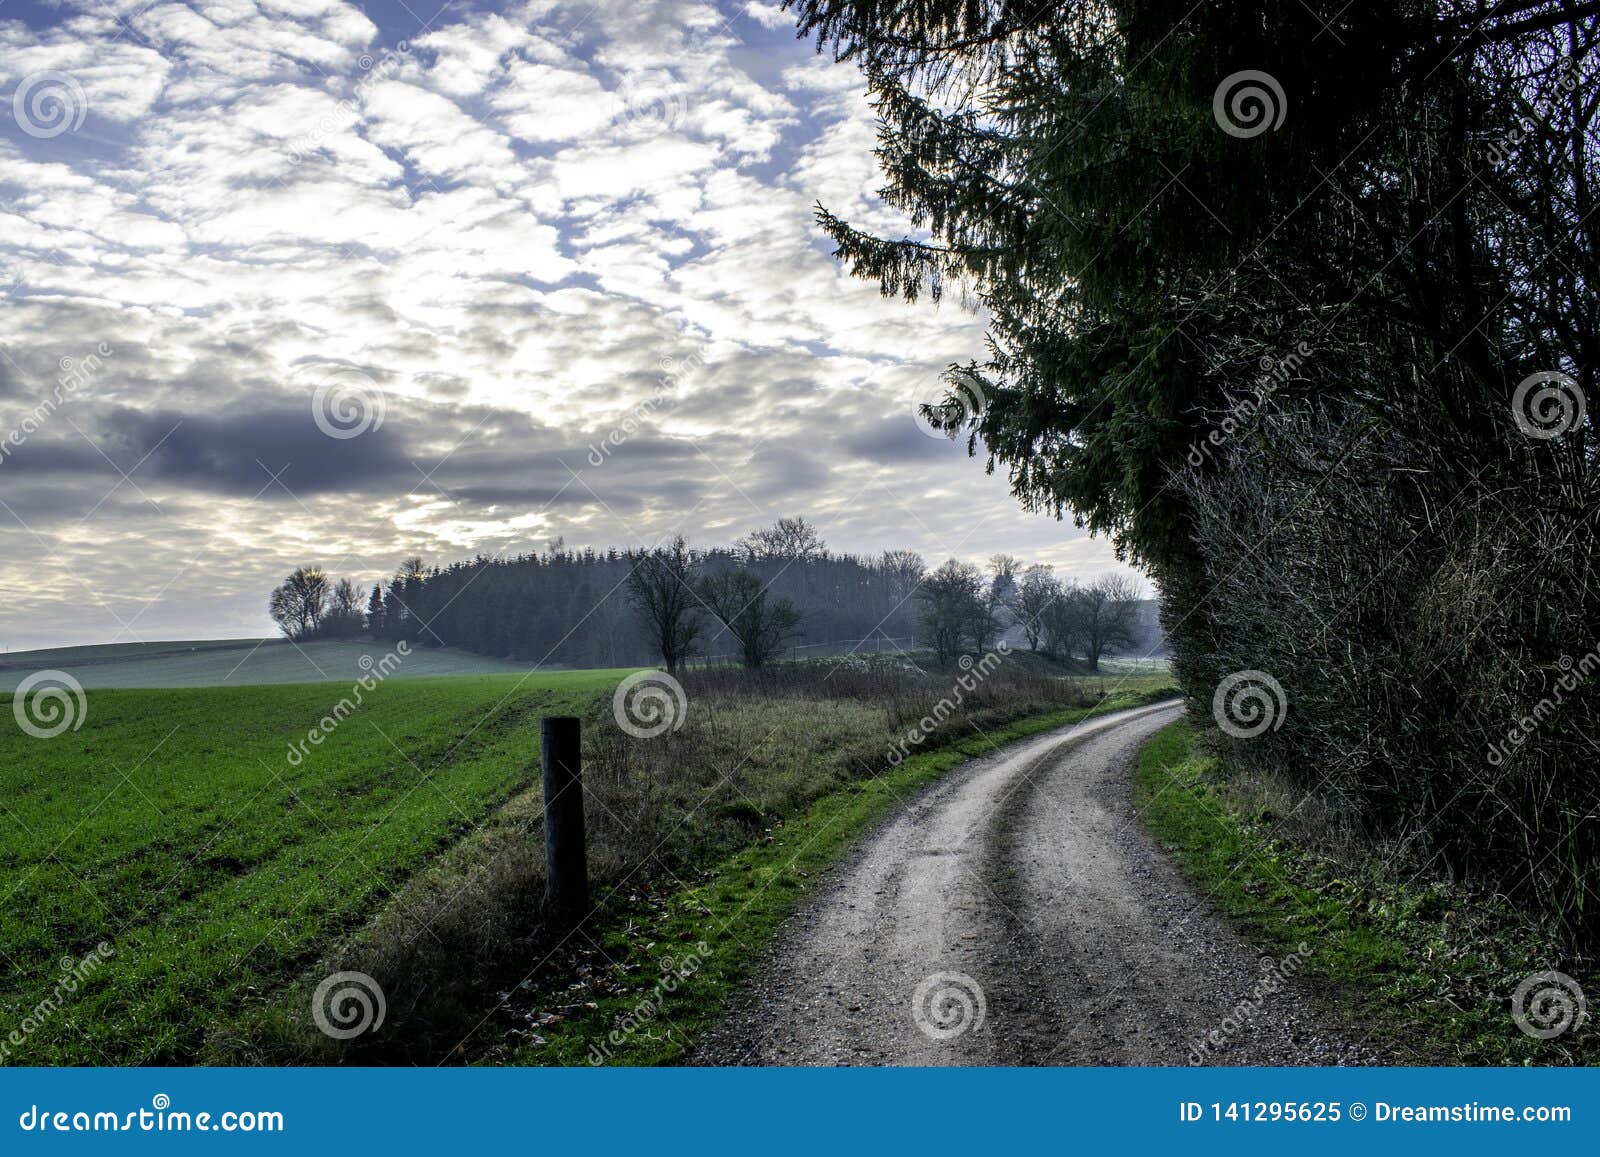 Danish Countryside with Amazing Detail Image paths, grass: 141295625